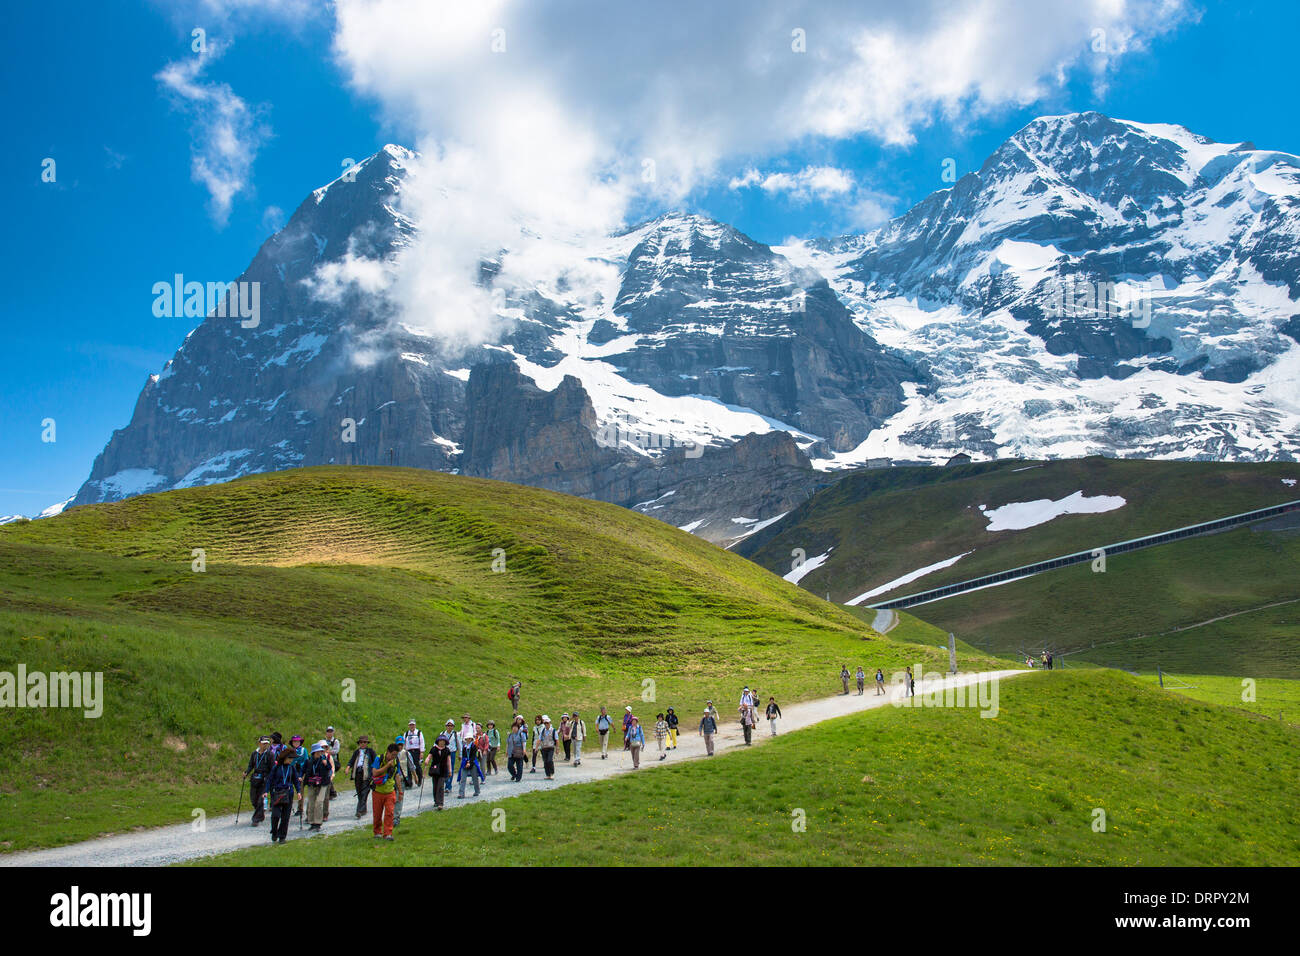 Japanese tourists on walking trail by the North Face of the Eiger mountain in the Swiss Alps, Bernese Oberland, Switzerland Stock Photo